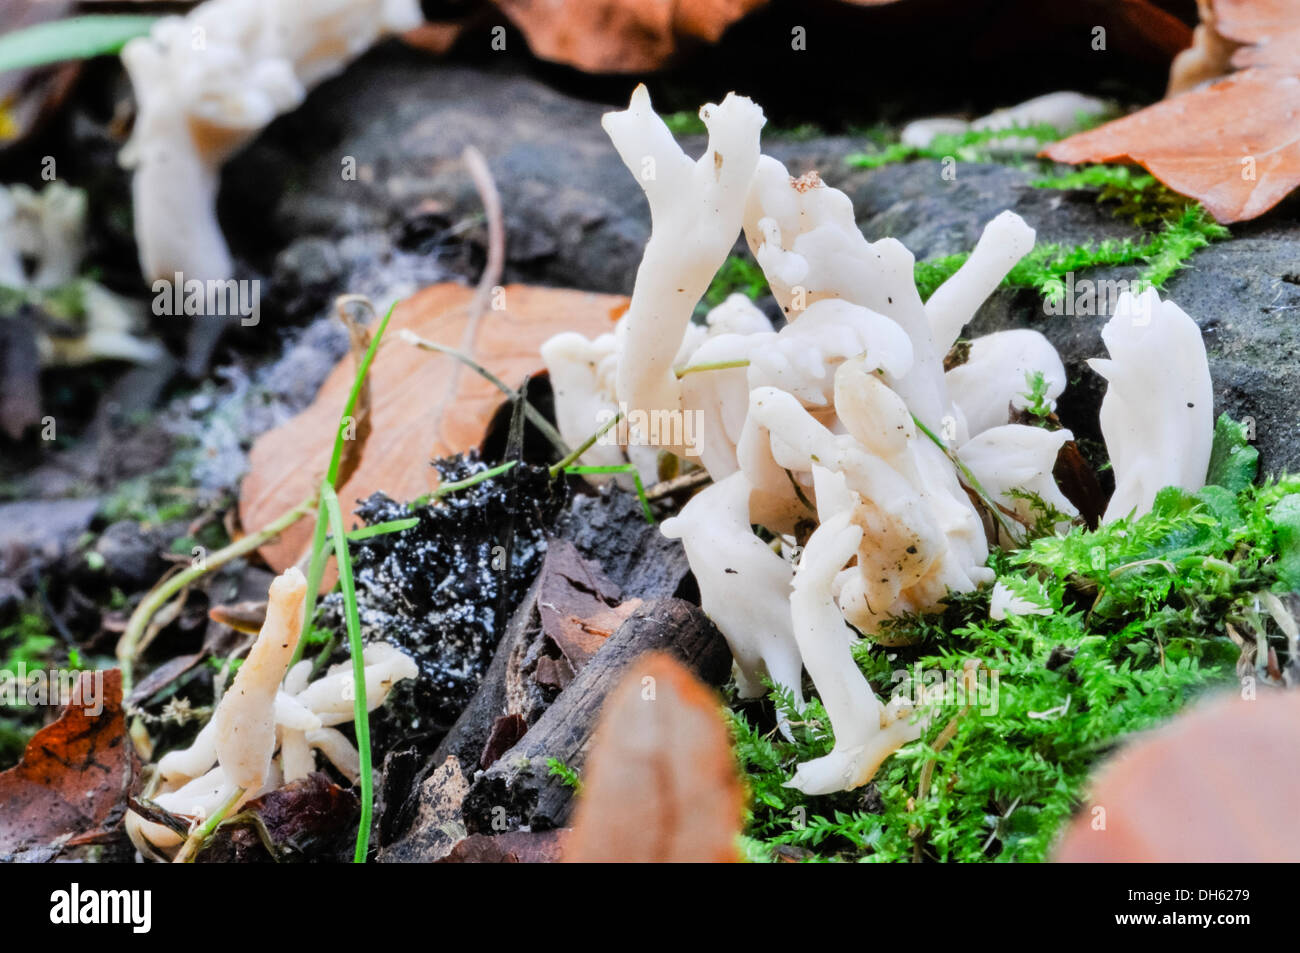 Jelly fungus growing among leaf litter Stock Photo